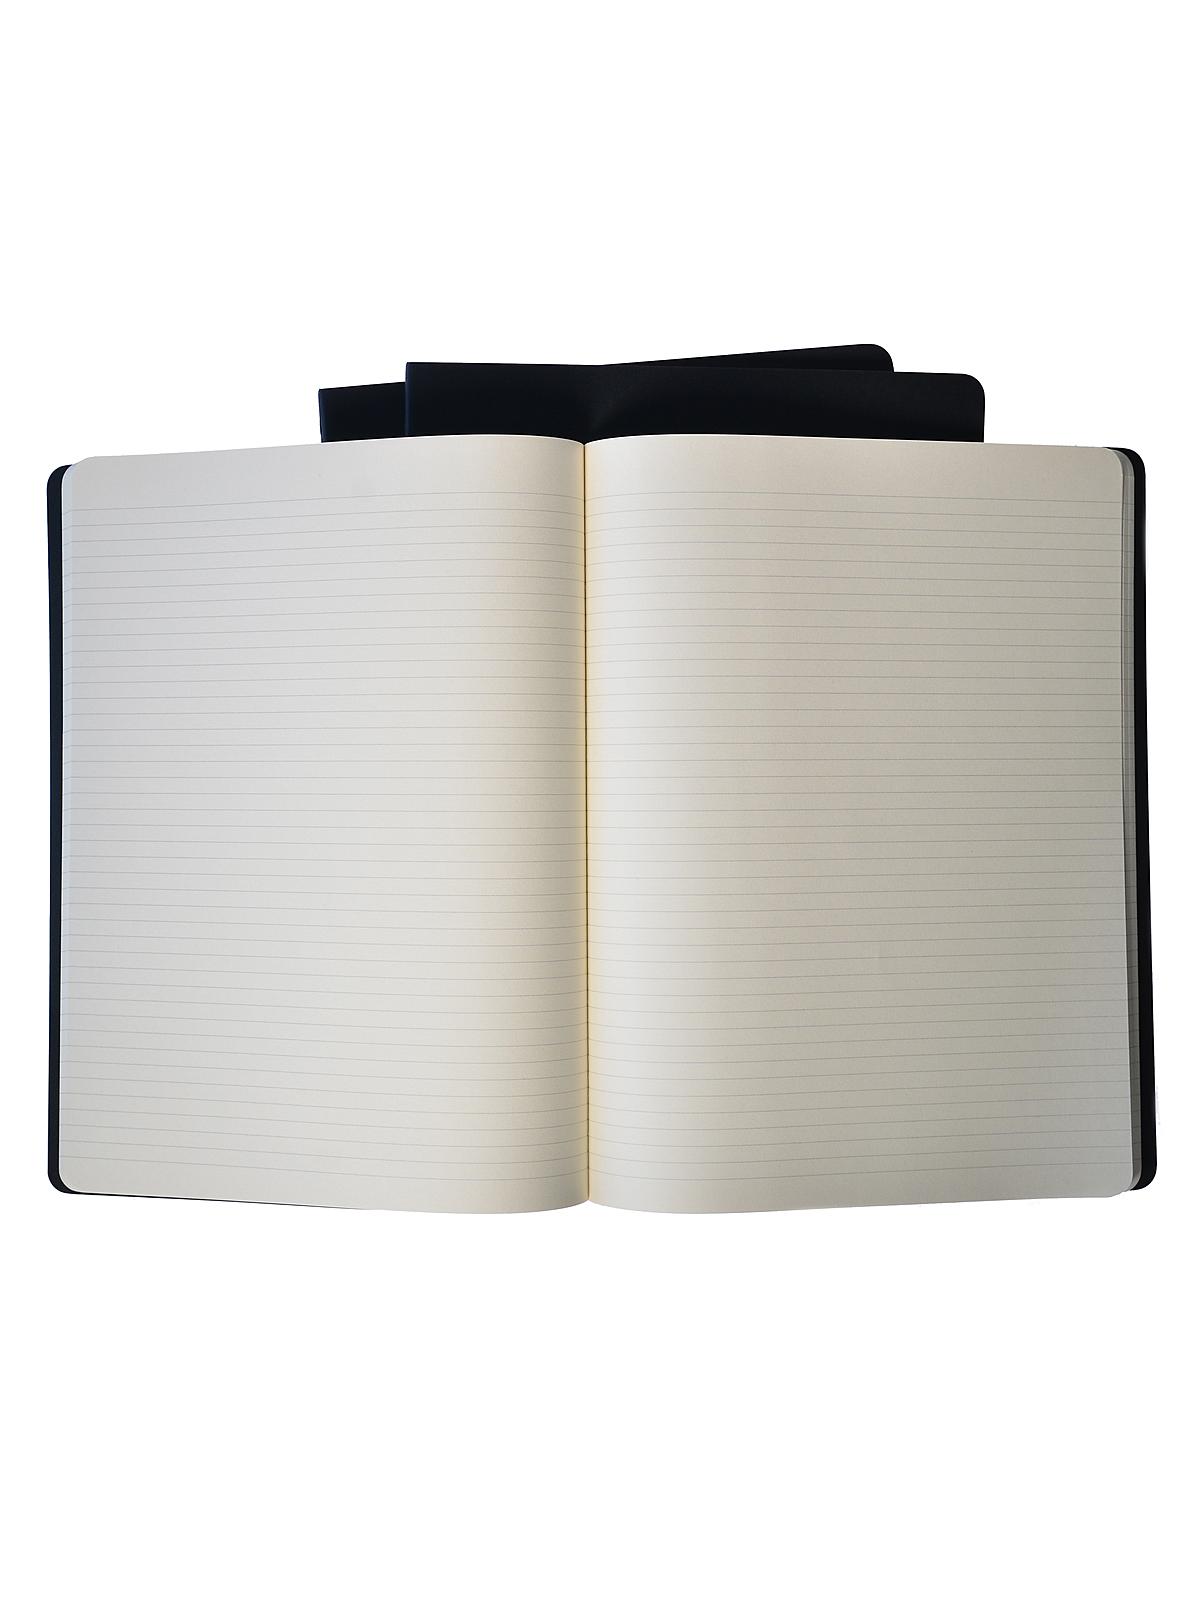 Cahier Journals Black, Ruled 8 1 2 In. X 11 In. Pack Of 3, 120 Pages Each